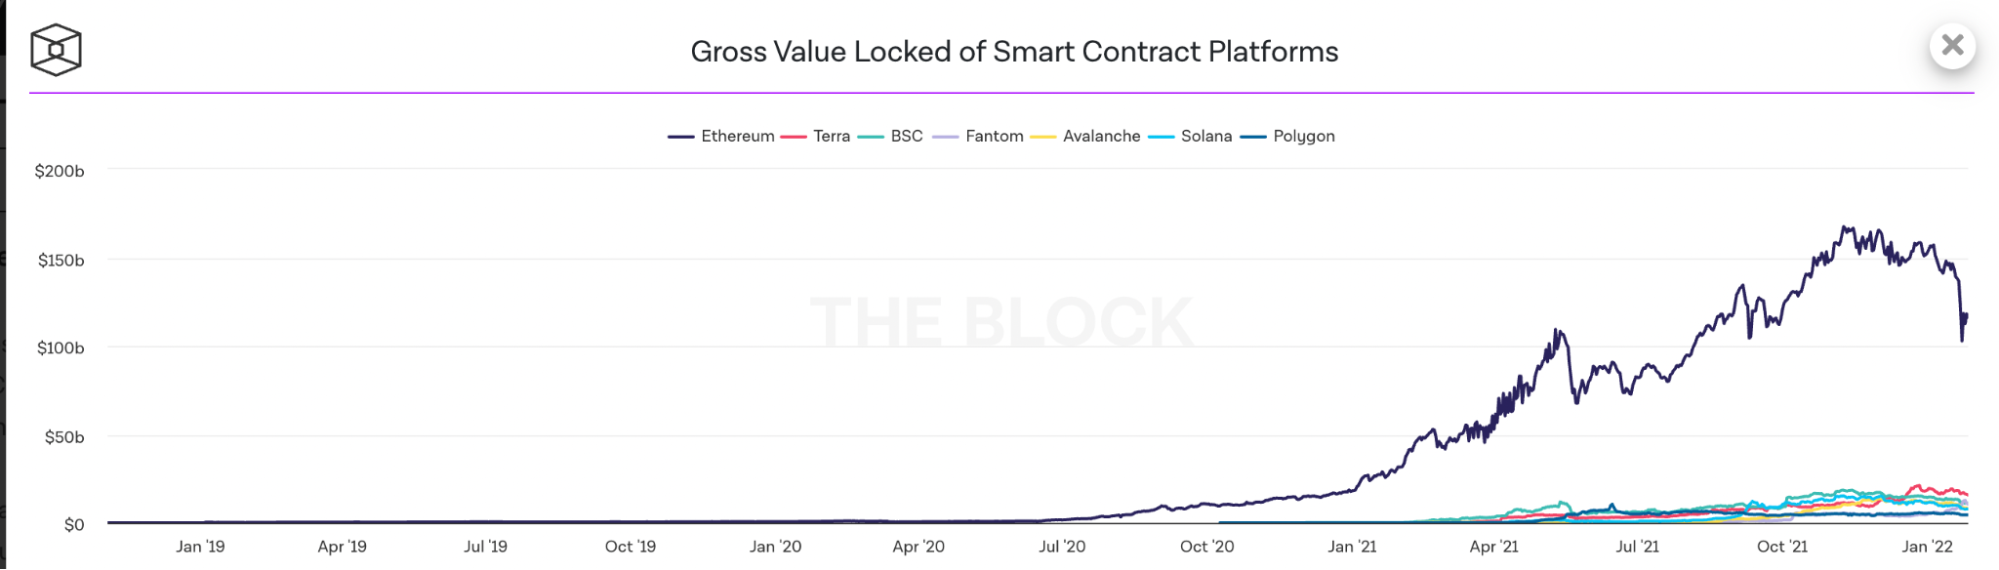 gross_value_locked_in_smart_contracts